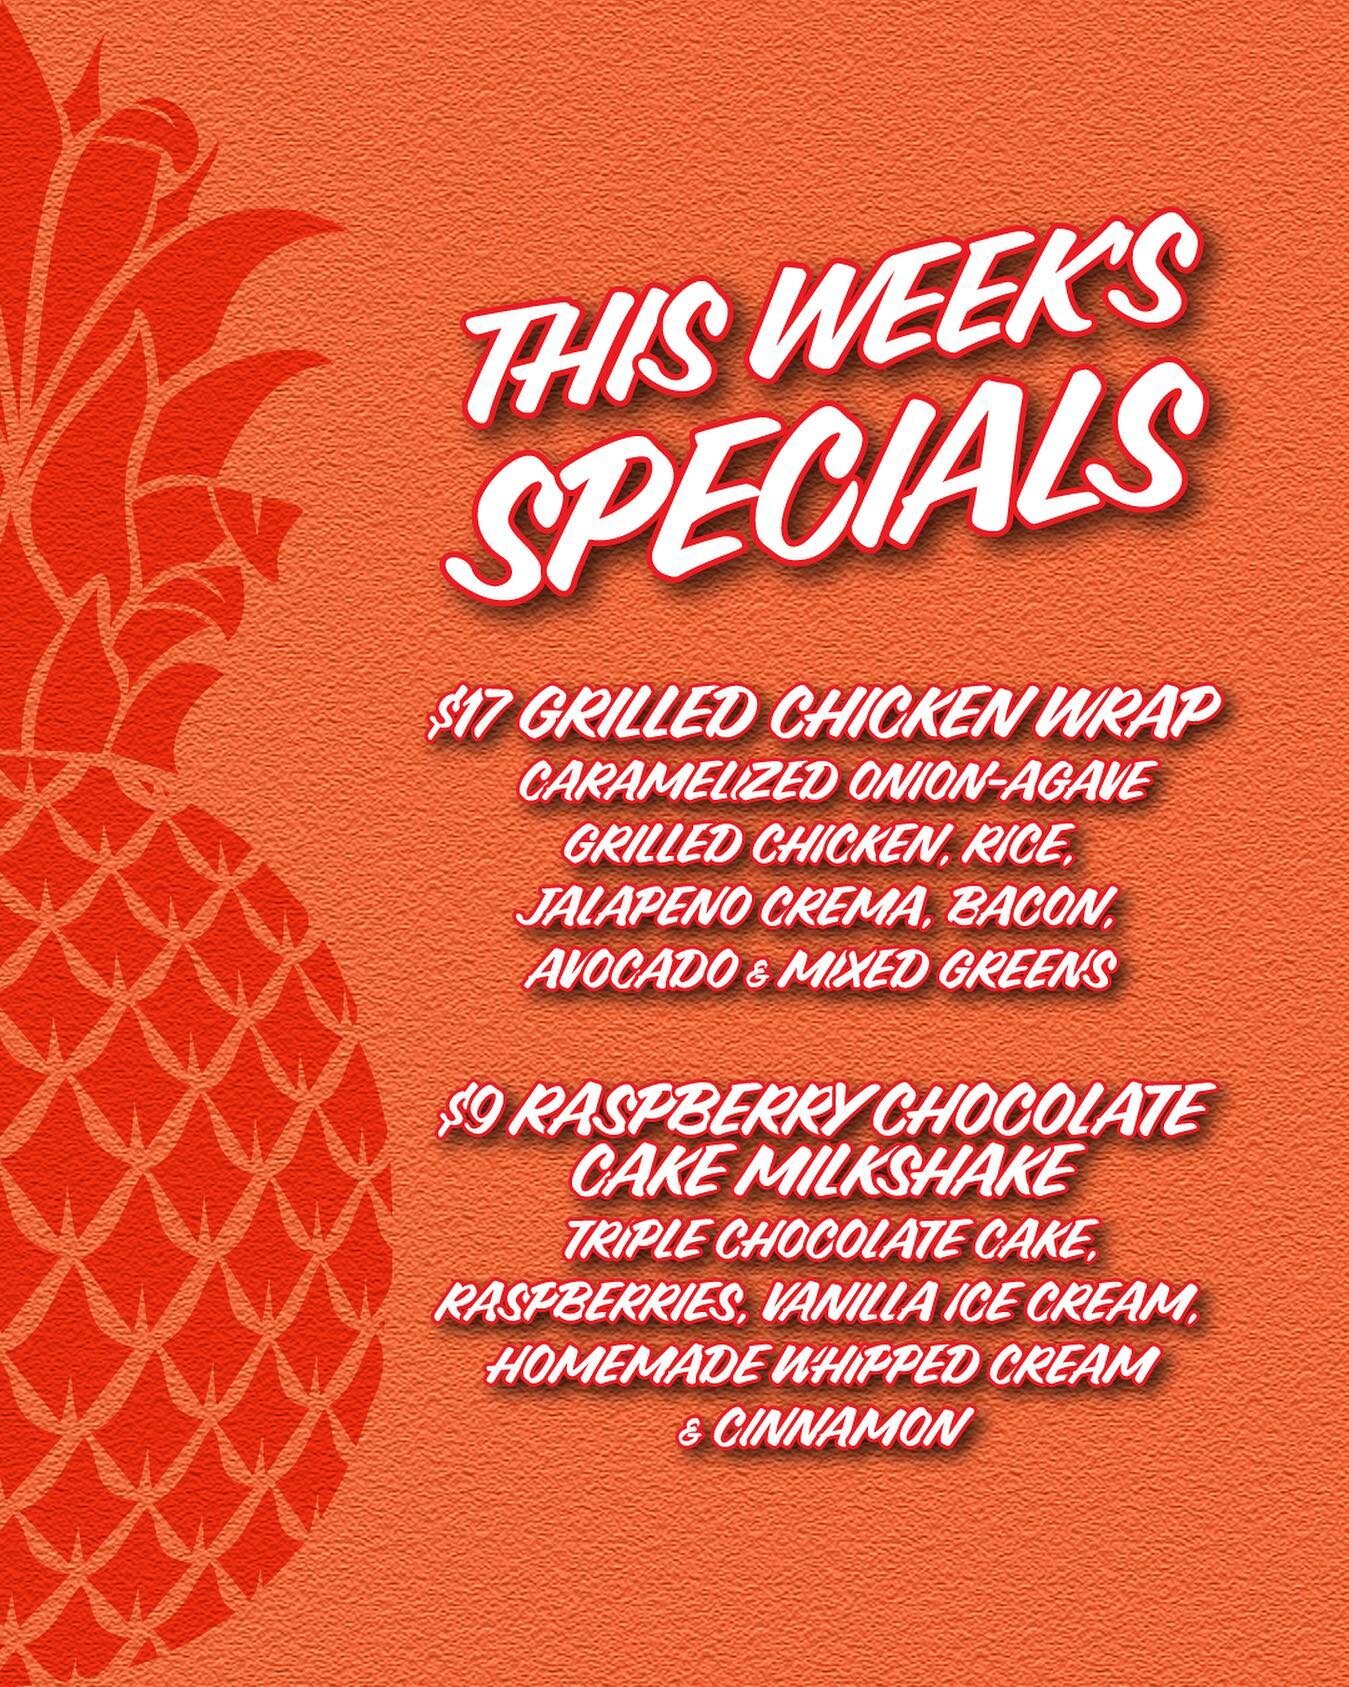 WHO&rsquo;S READY FOR WEEKLY SPECIALS?!

This week&rsquo;s specials are brought to you by balance. Chicken Wrap for dinner and wash it down with a Raspberry Chocolate Milk Shake! 🥤